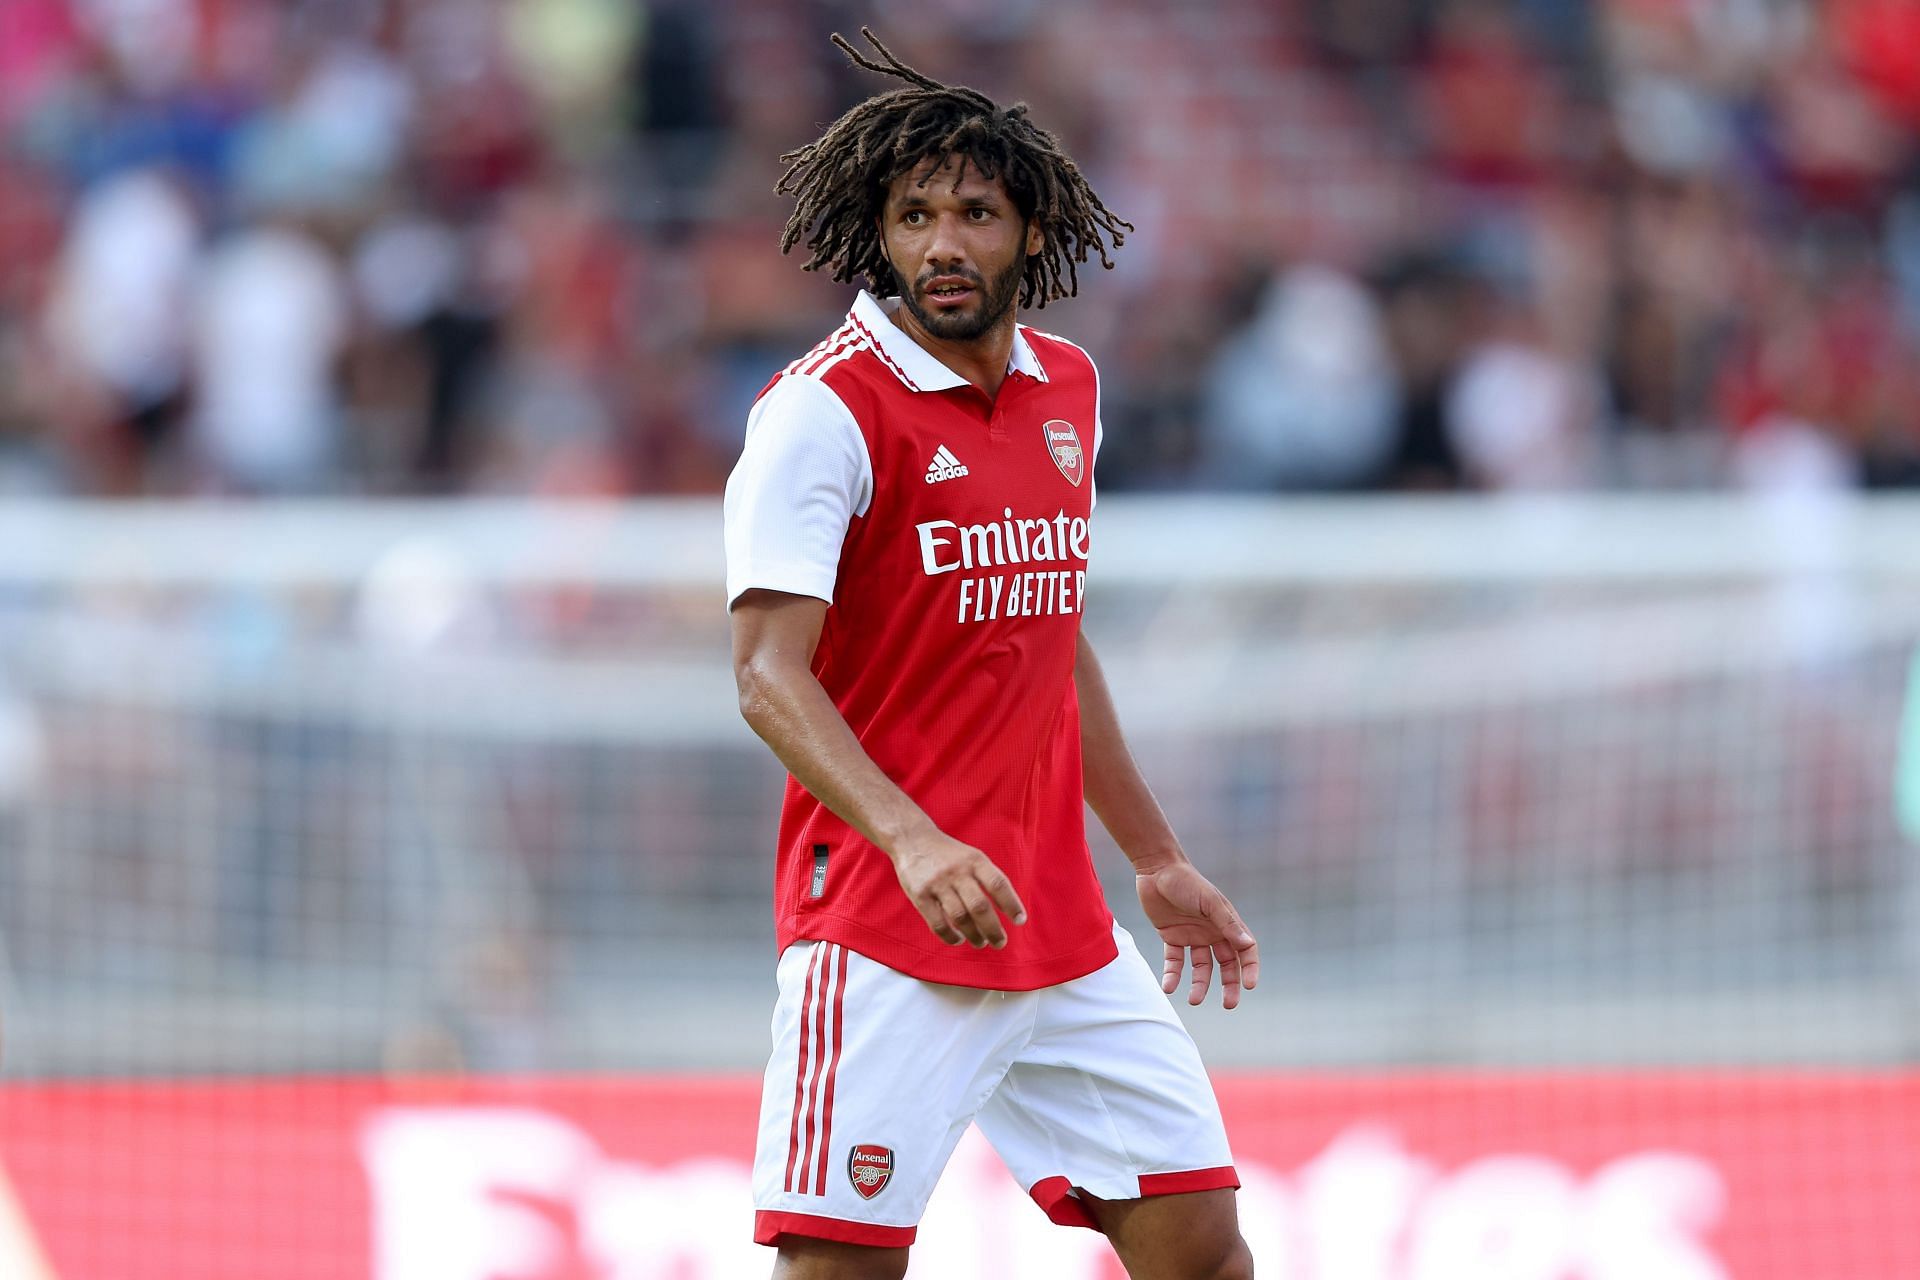 Elneny could be on his way out of Arsenal